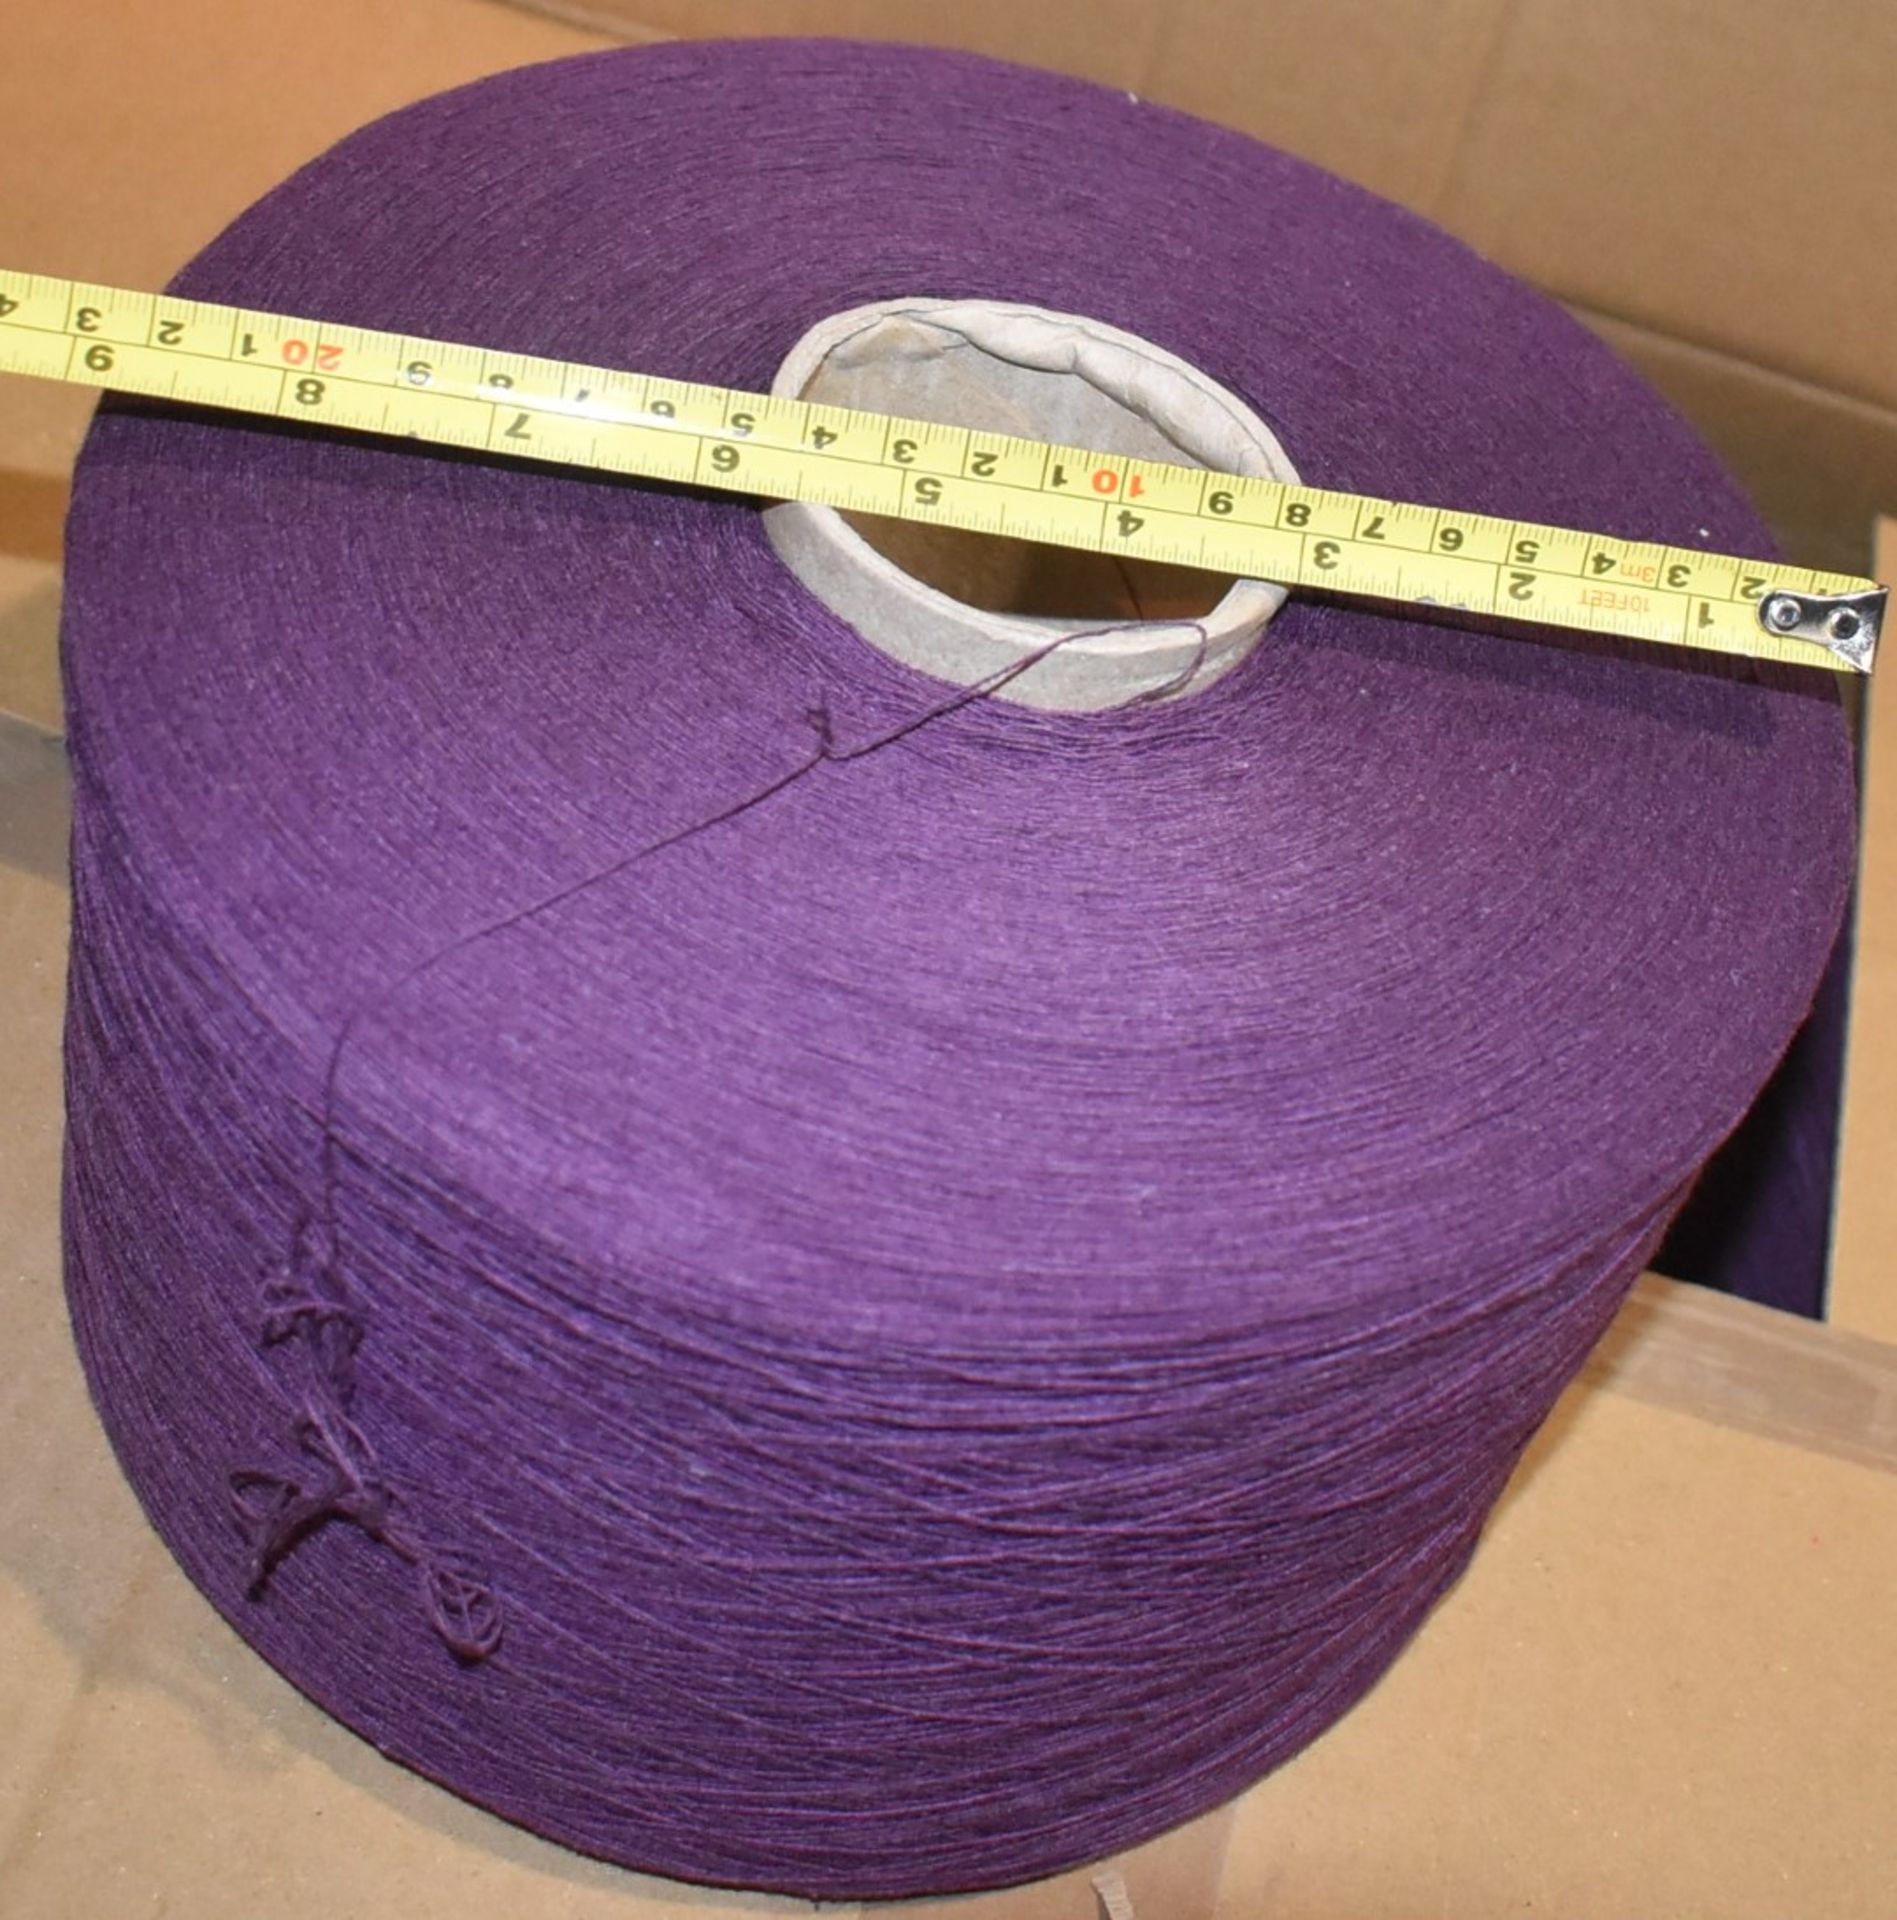 1 x Cone of 1/13 MicroCotton Knitting Yarn - Purple - Approx Weight: 2,300g - New Stock ABL Yarn - Image 11 of 13